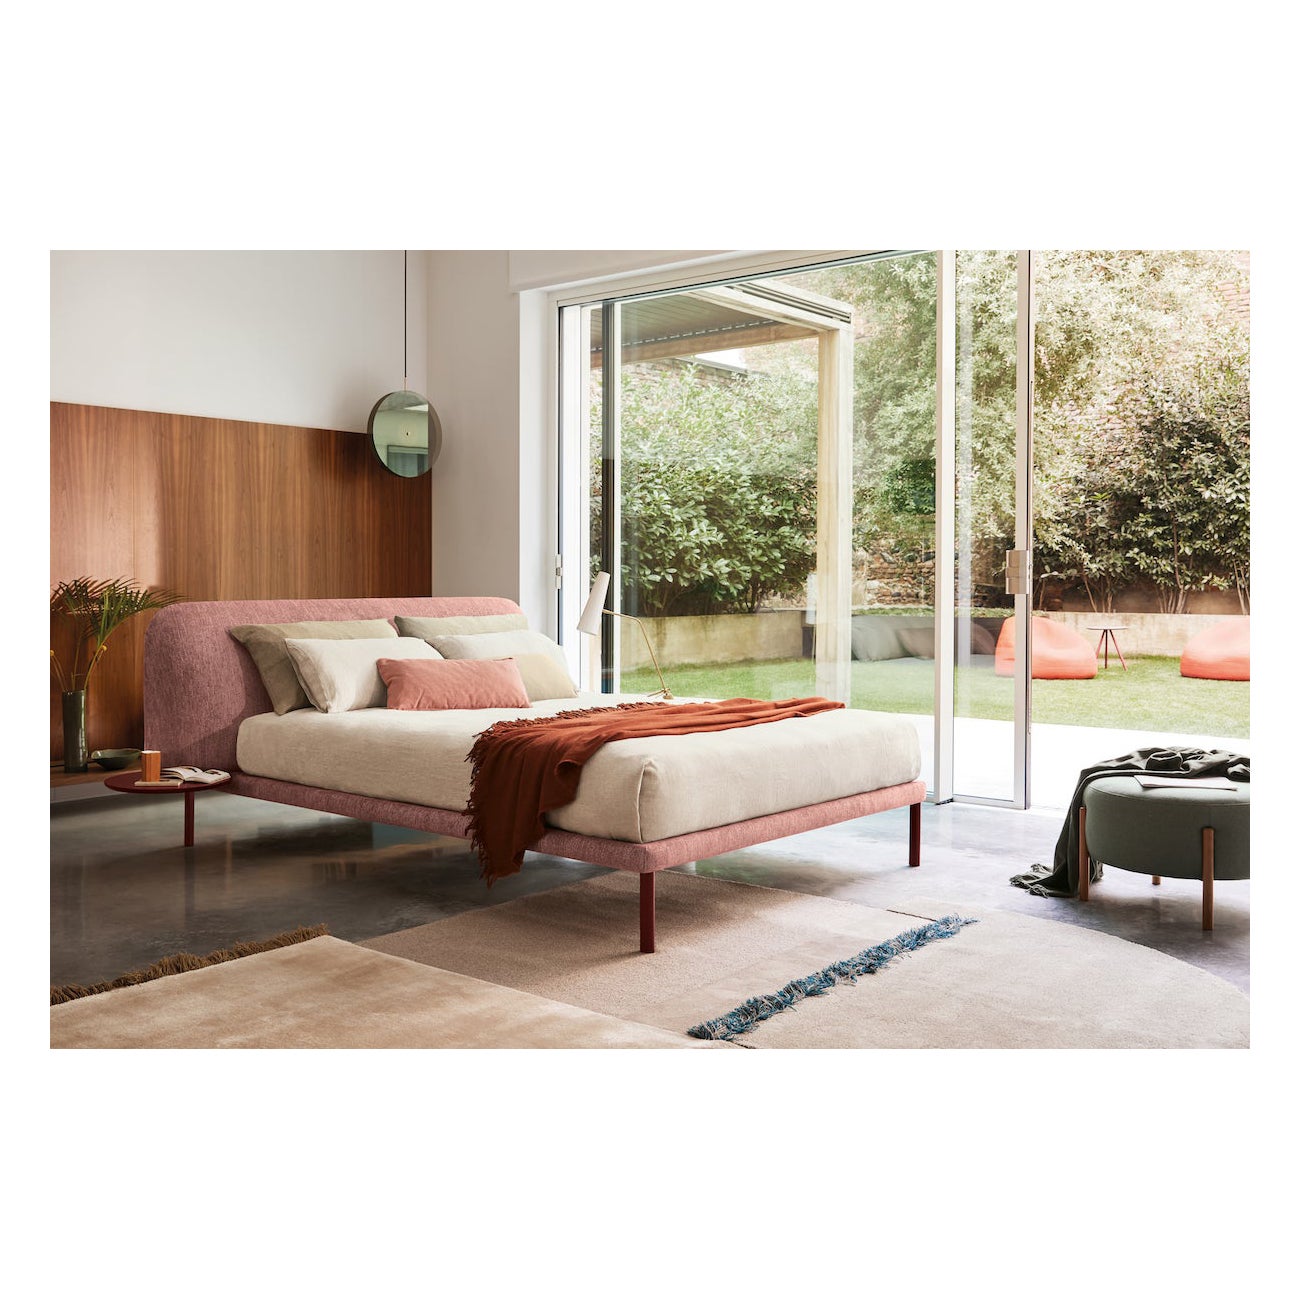 Bolzan Marty Bed by E-GGS For Sale